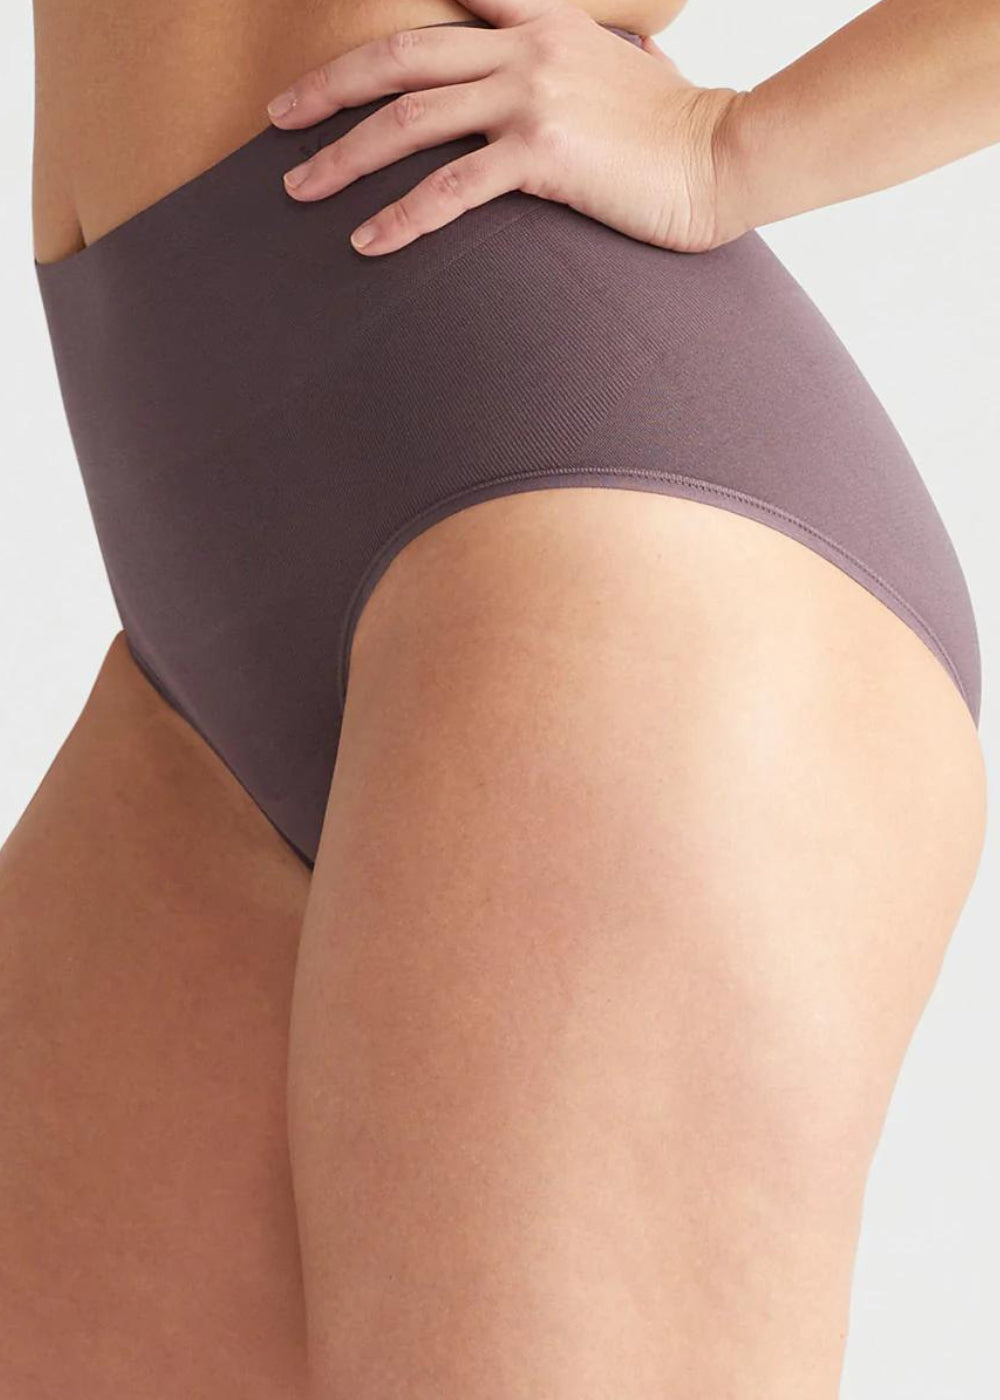 Livi Comfortably Curved Smoothing Brief - Seamless from Yummie in Raisin  - 1